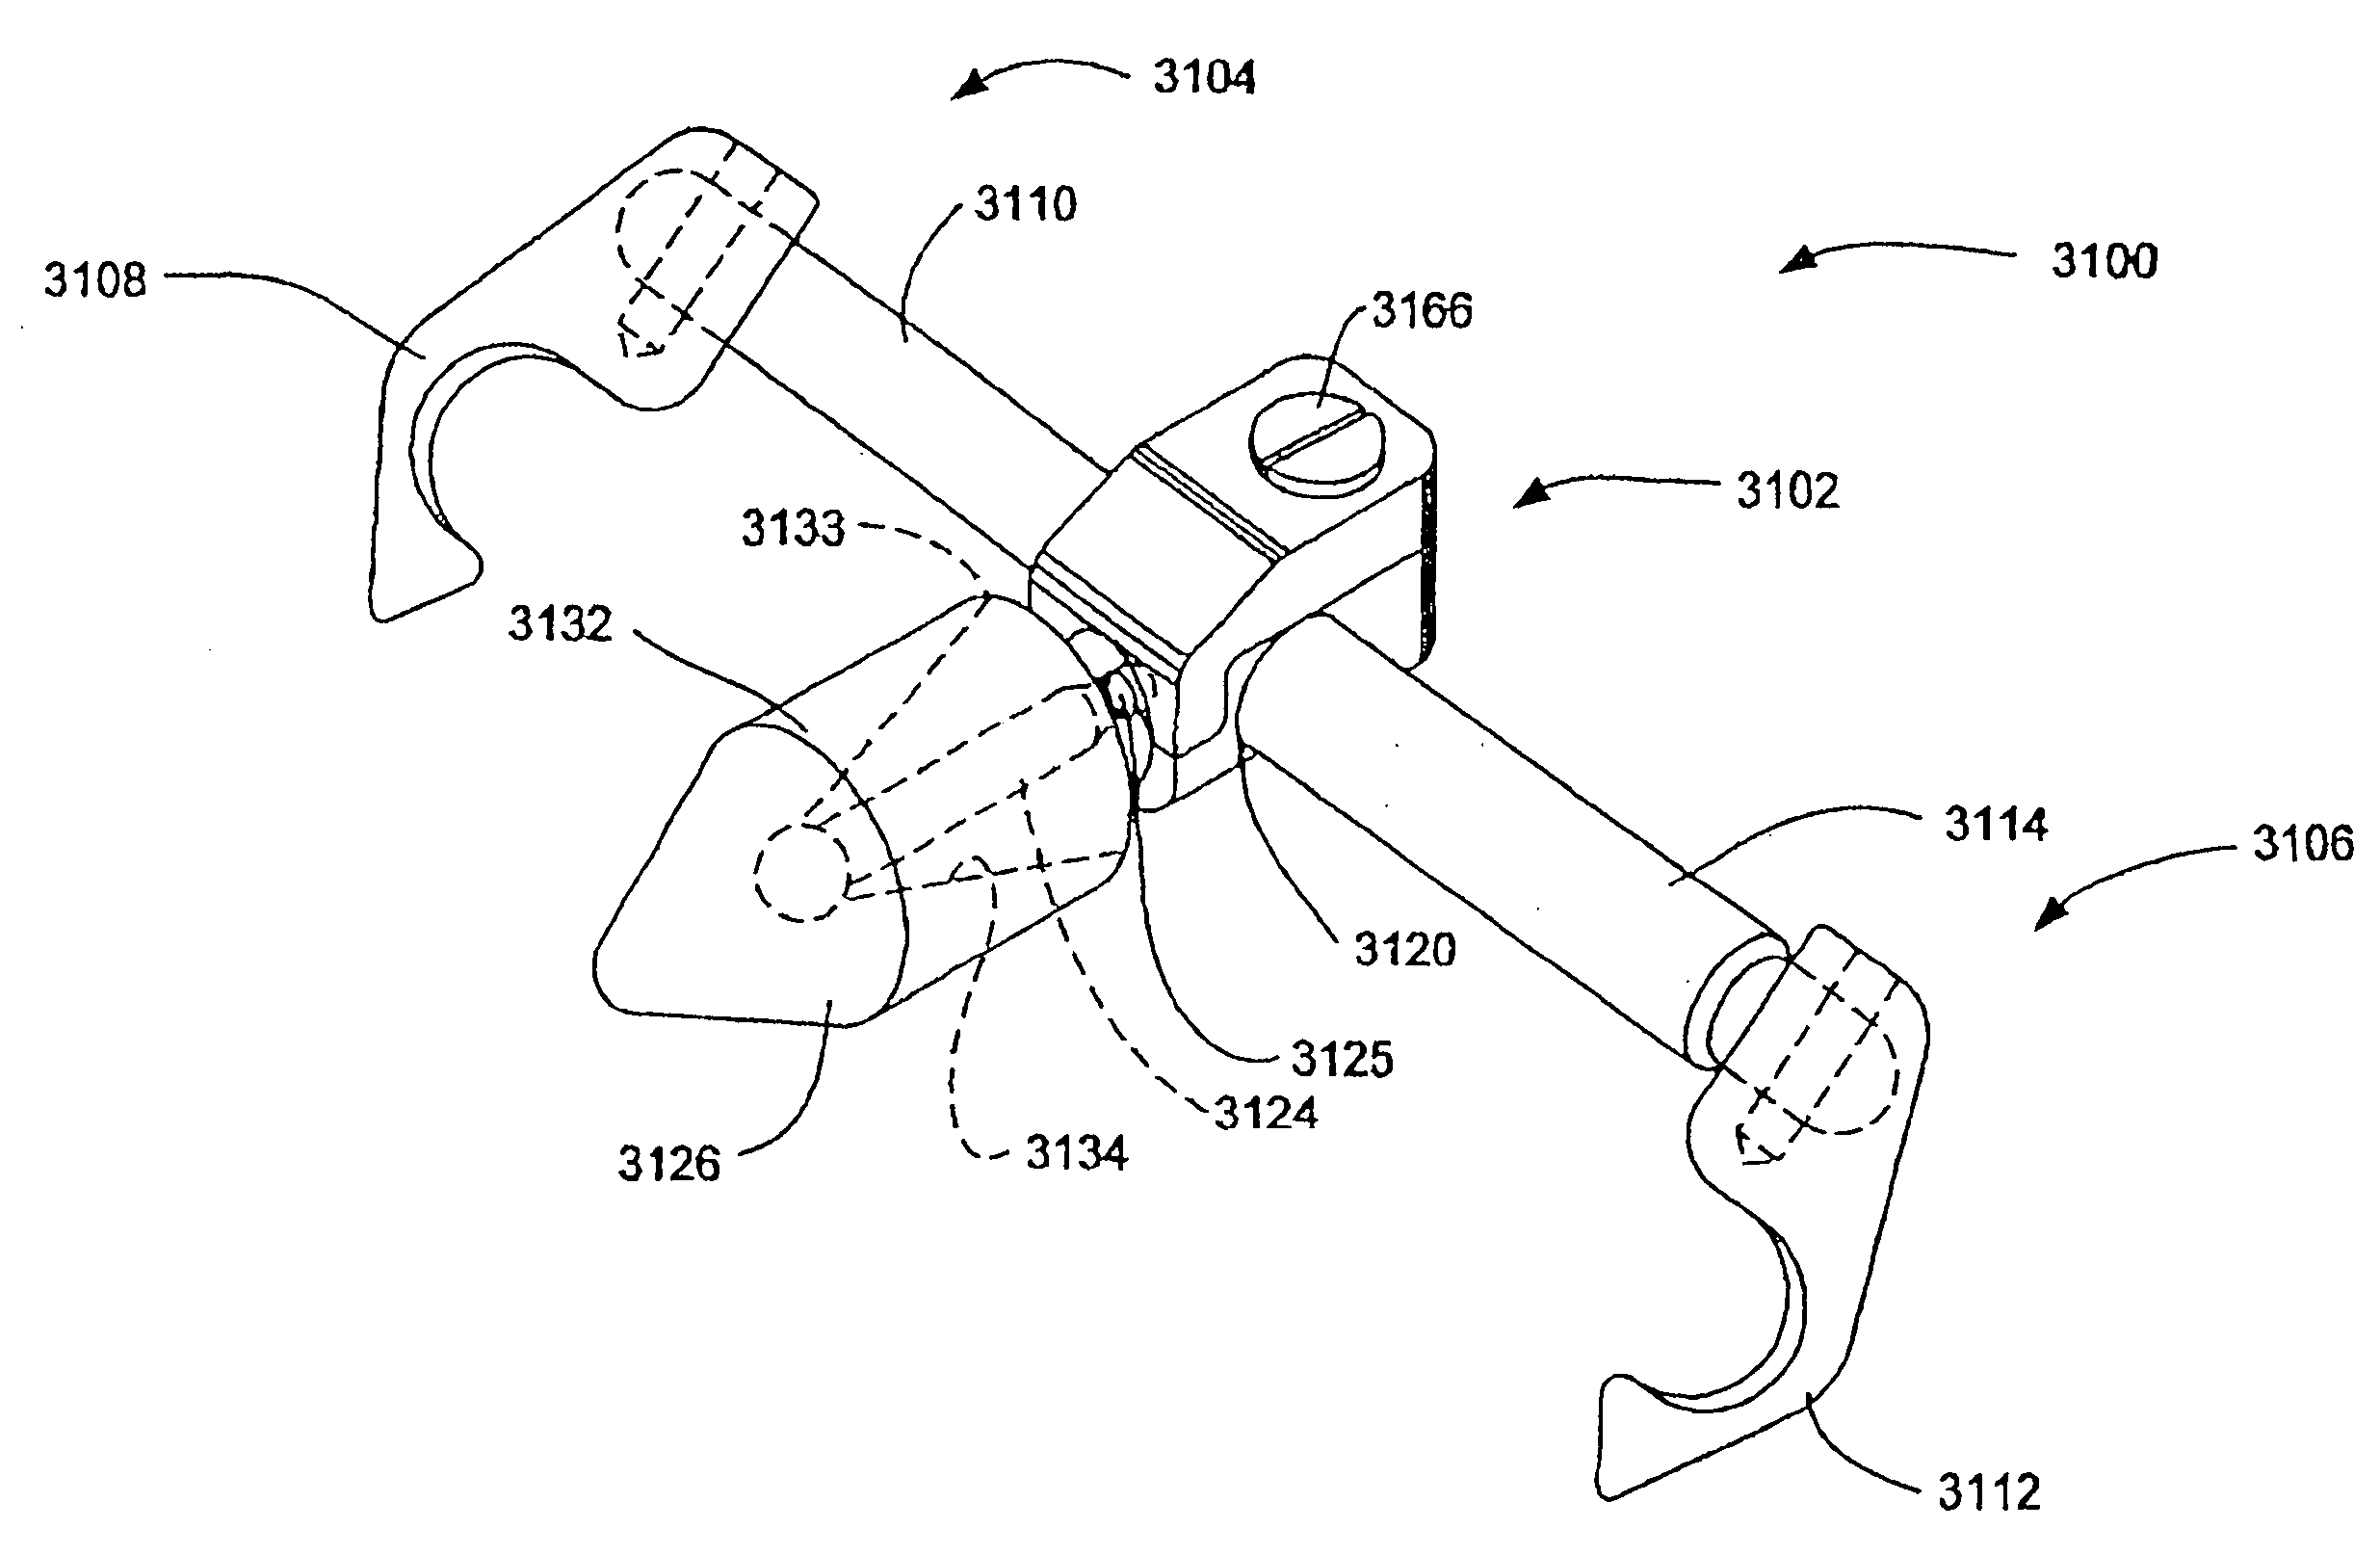 Supplemental spine fixation device and method